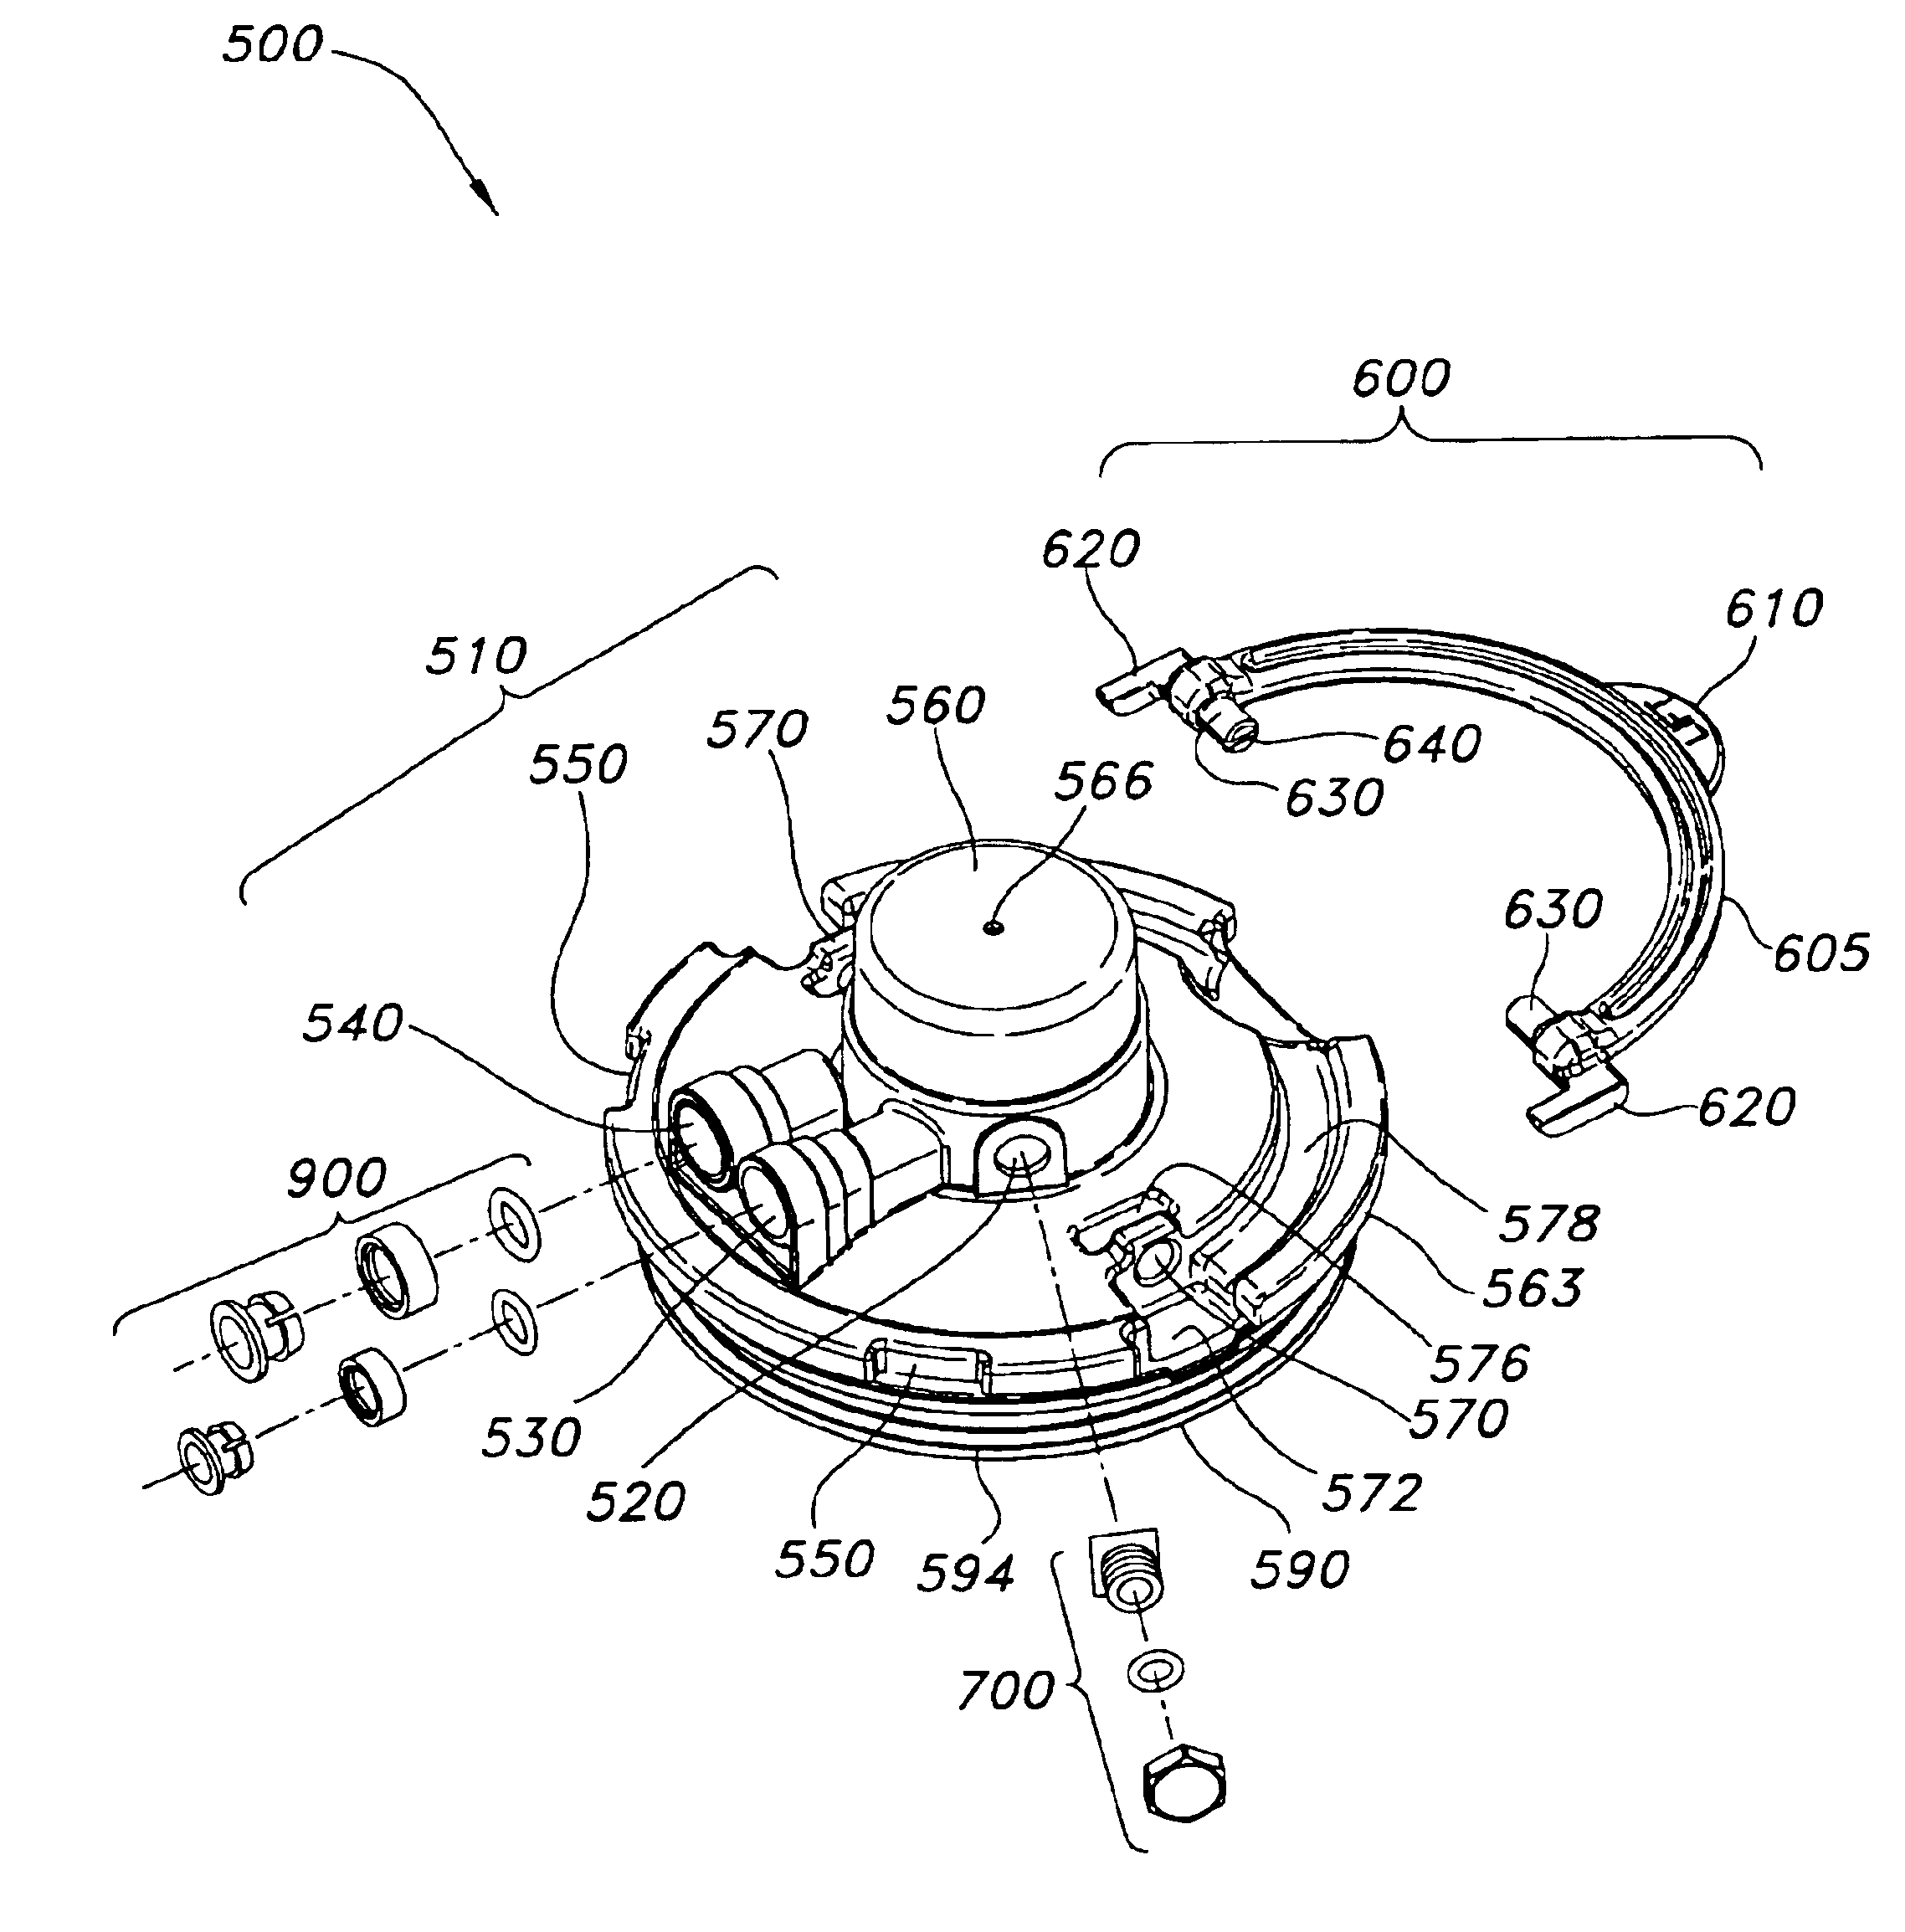 Removable closure assembly for a water treatment system